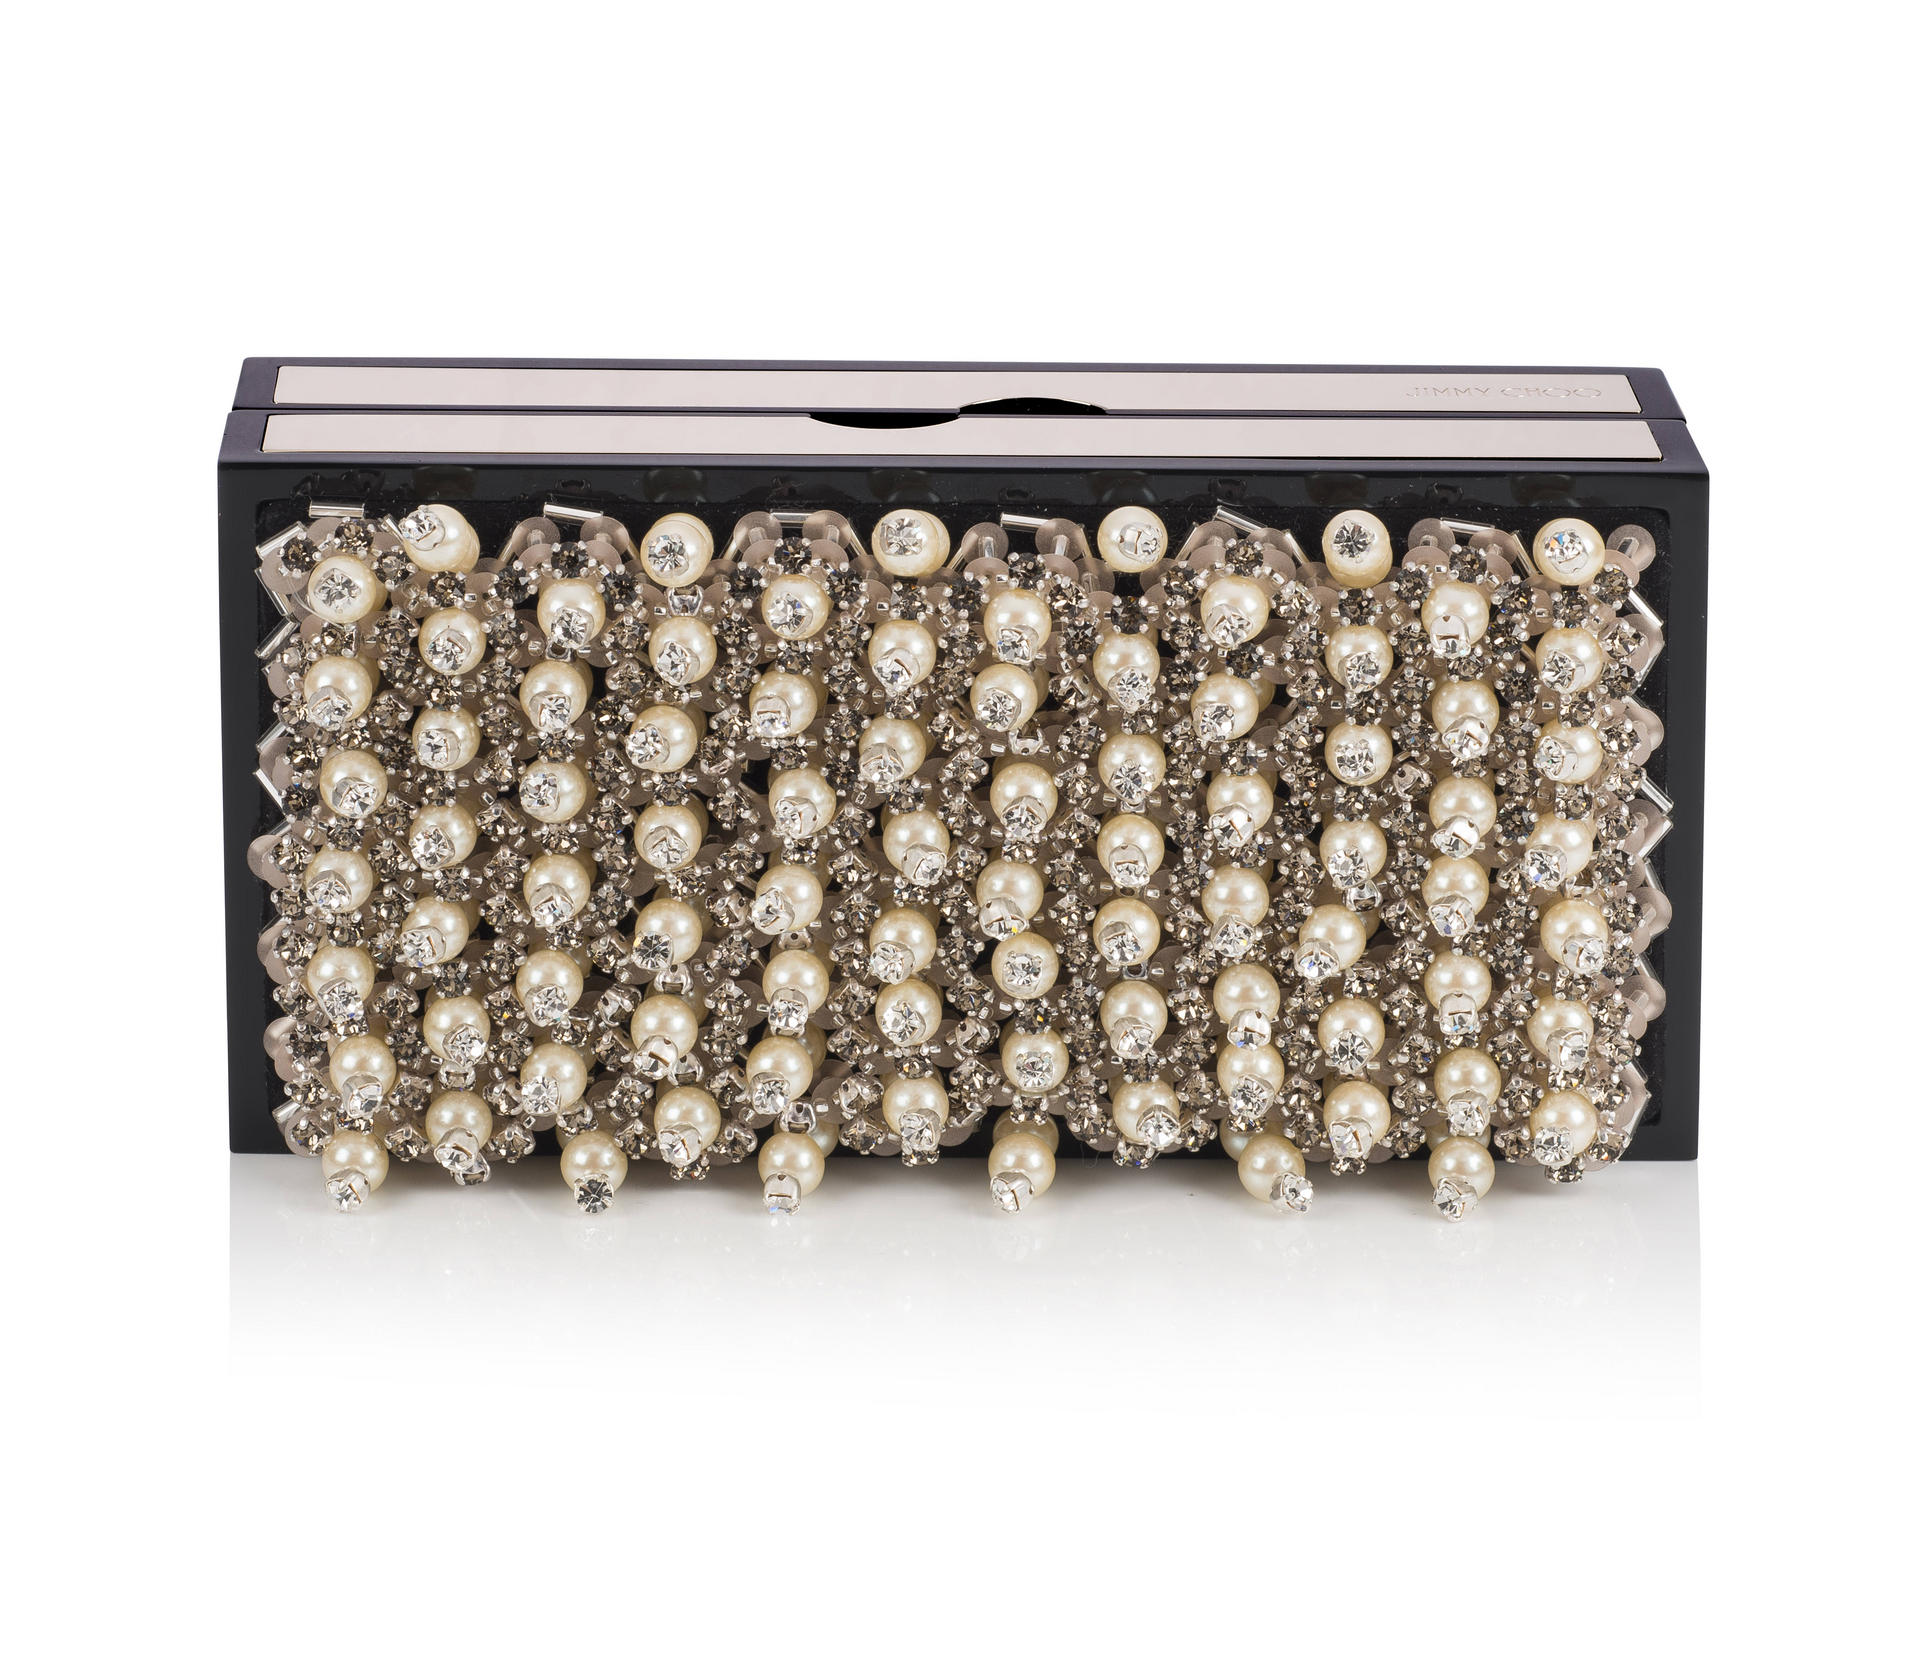 Jimmy ChooRock it with this handy metal box clutch embellished with pearls and crystals, HK$28,900